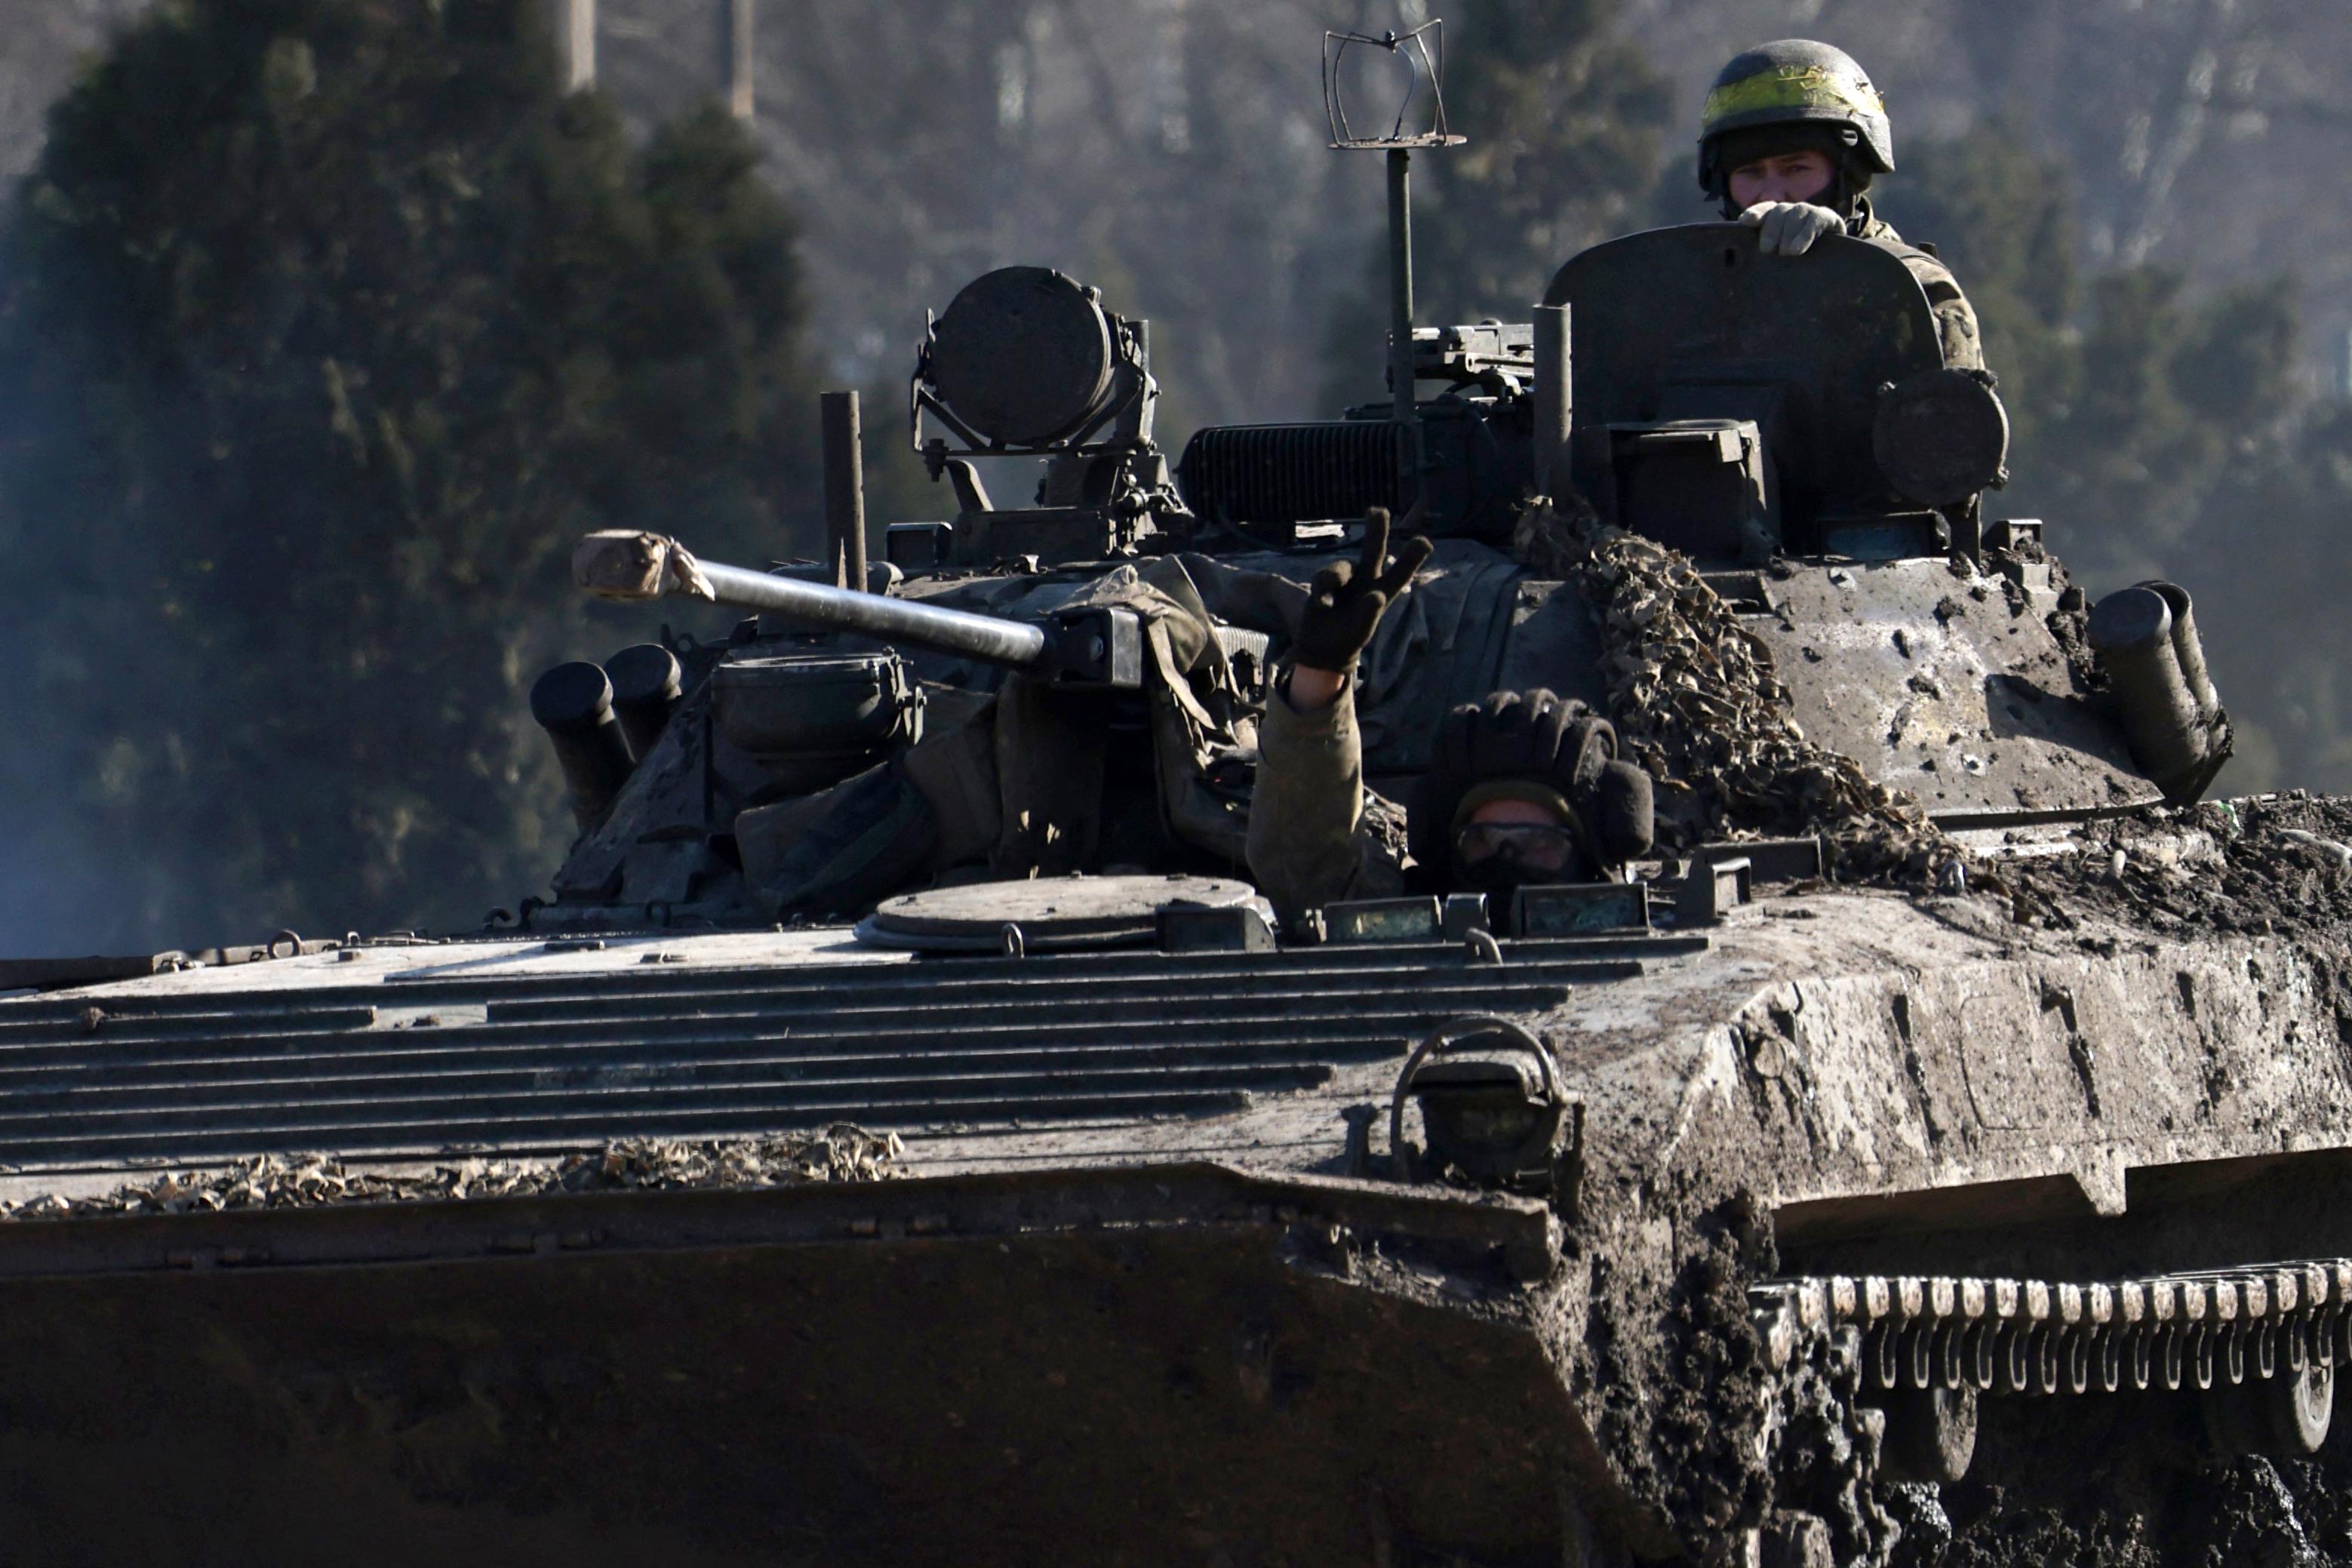 Rising Tensions in Eastern Europe: Germany’s New Security Plan and Russia’s Escalating Attacks